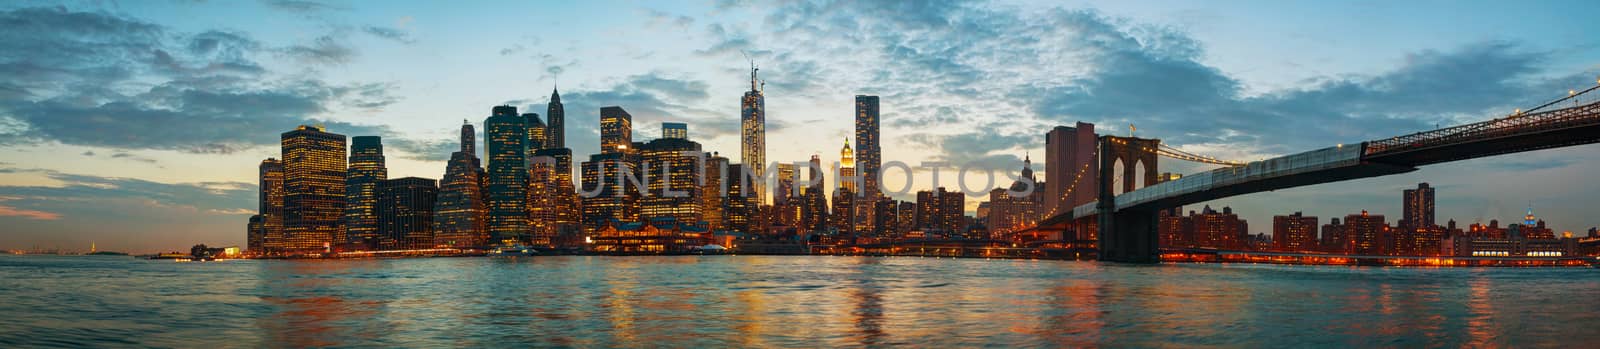 New York City cityscape at sunset by AndreyKr